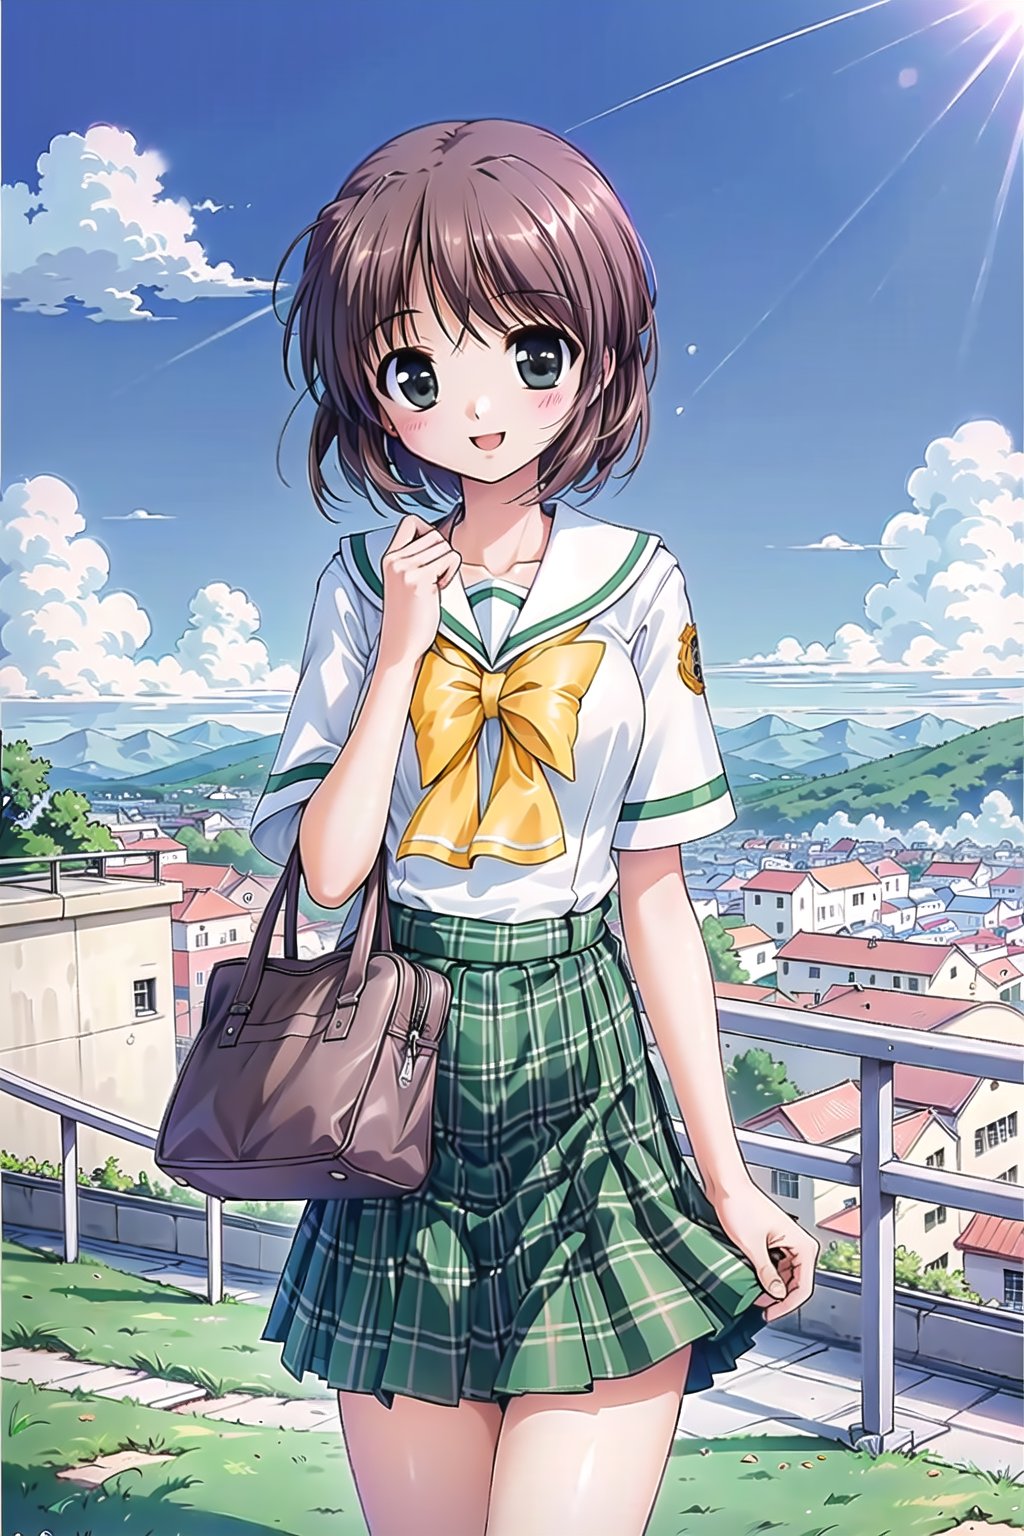 (masterpiece,Best  Quality, High Quality, Best Picture Quality Score: 1.3), (Sharp Picture Quality), Brown hair, short hair,Tie hair,School uniform,Skirt with checkerboard pattern, best smile,Beautiful scenery, girl standing on a hill, hills overlooking the city,alone,bule sky,